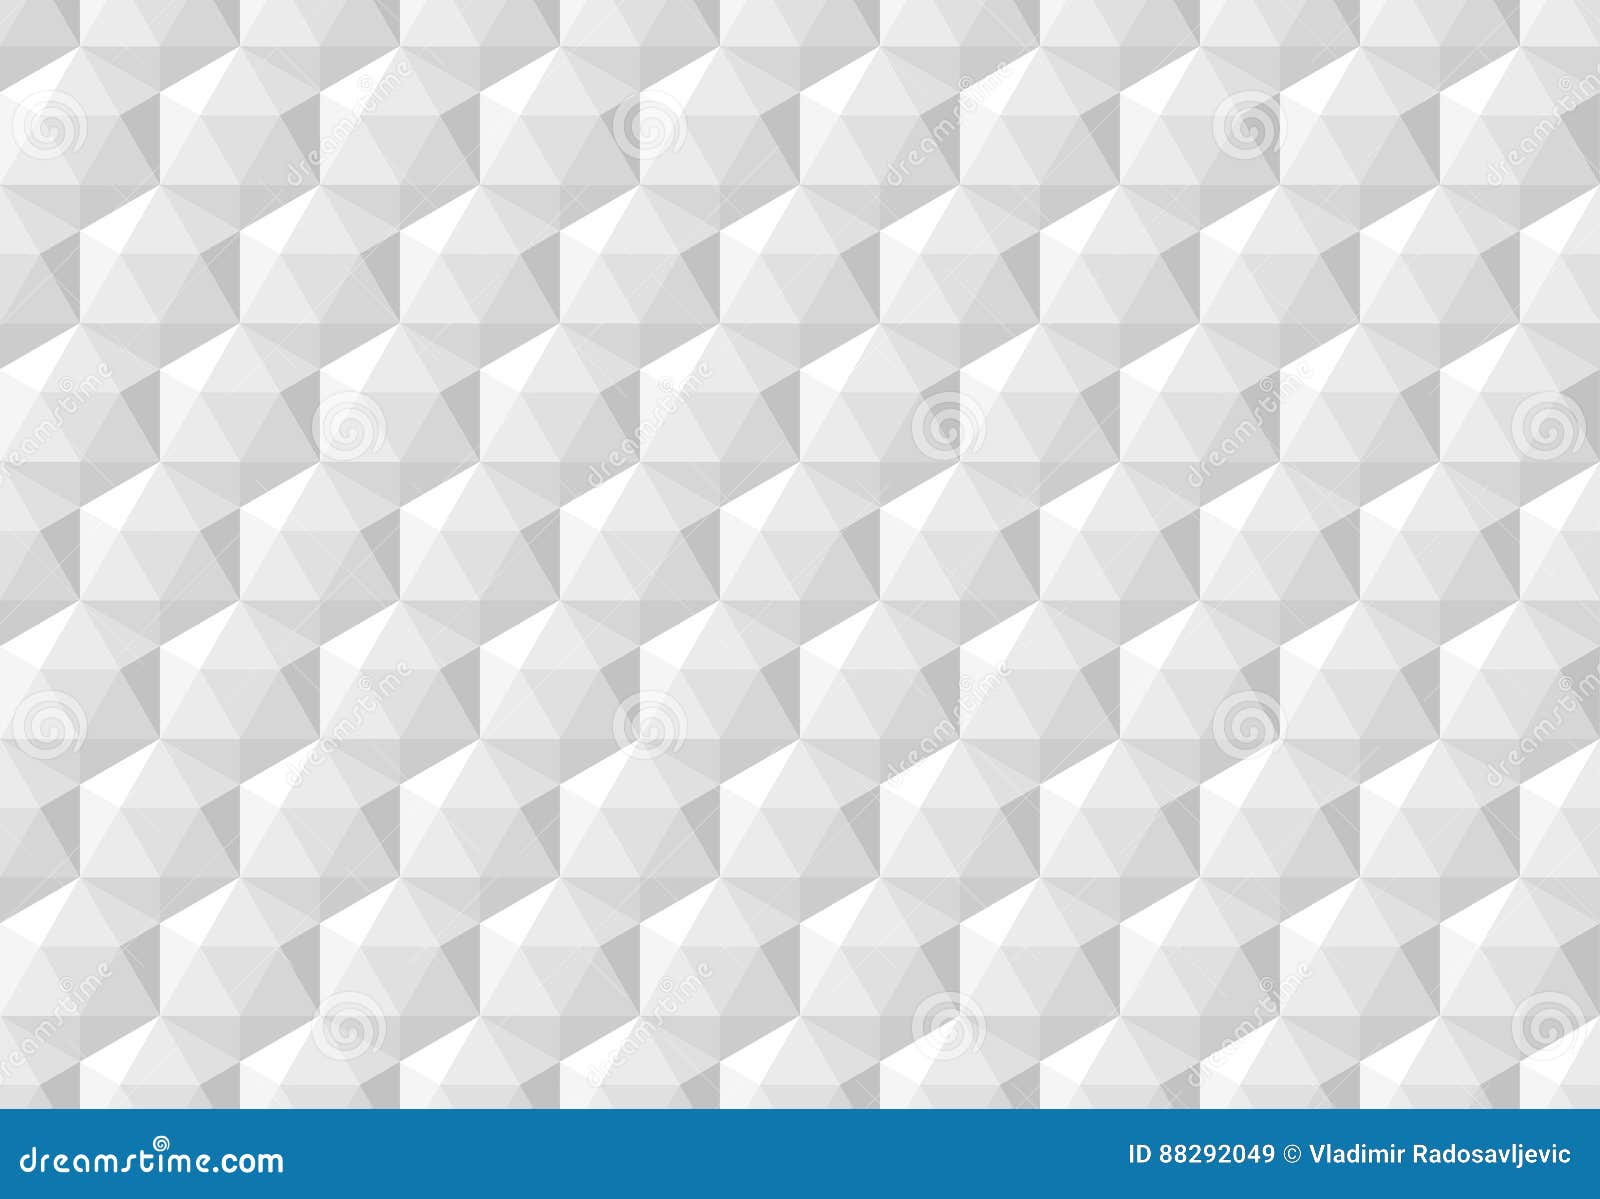 White Abstract Seamless Pattern with Geometric Hexagonal Cubes Stock ...